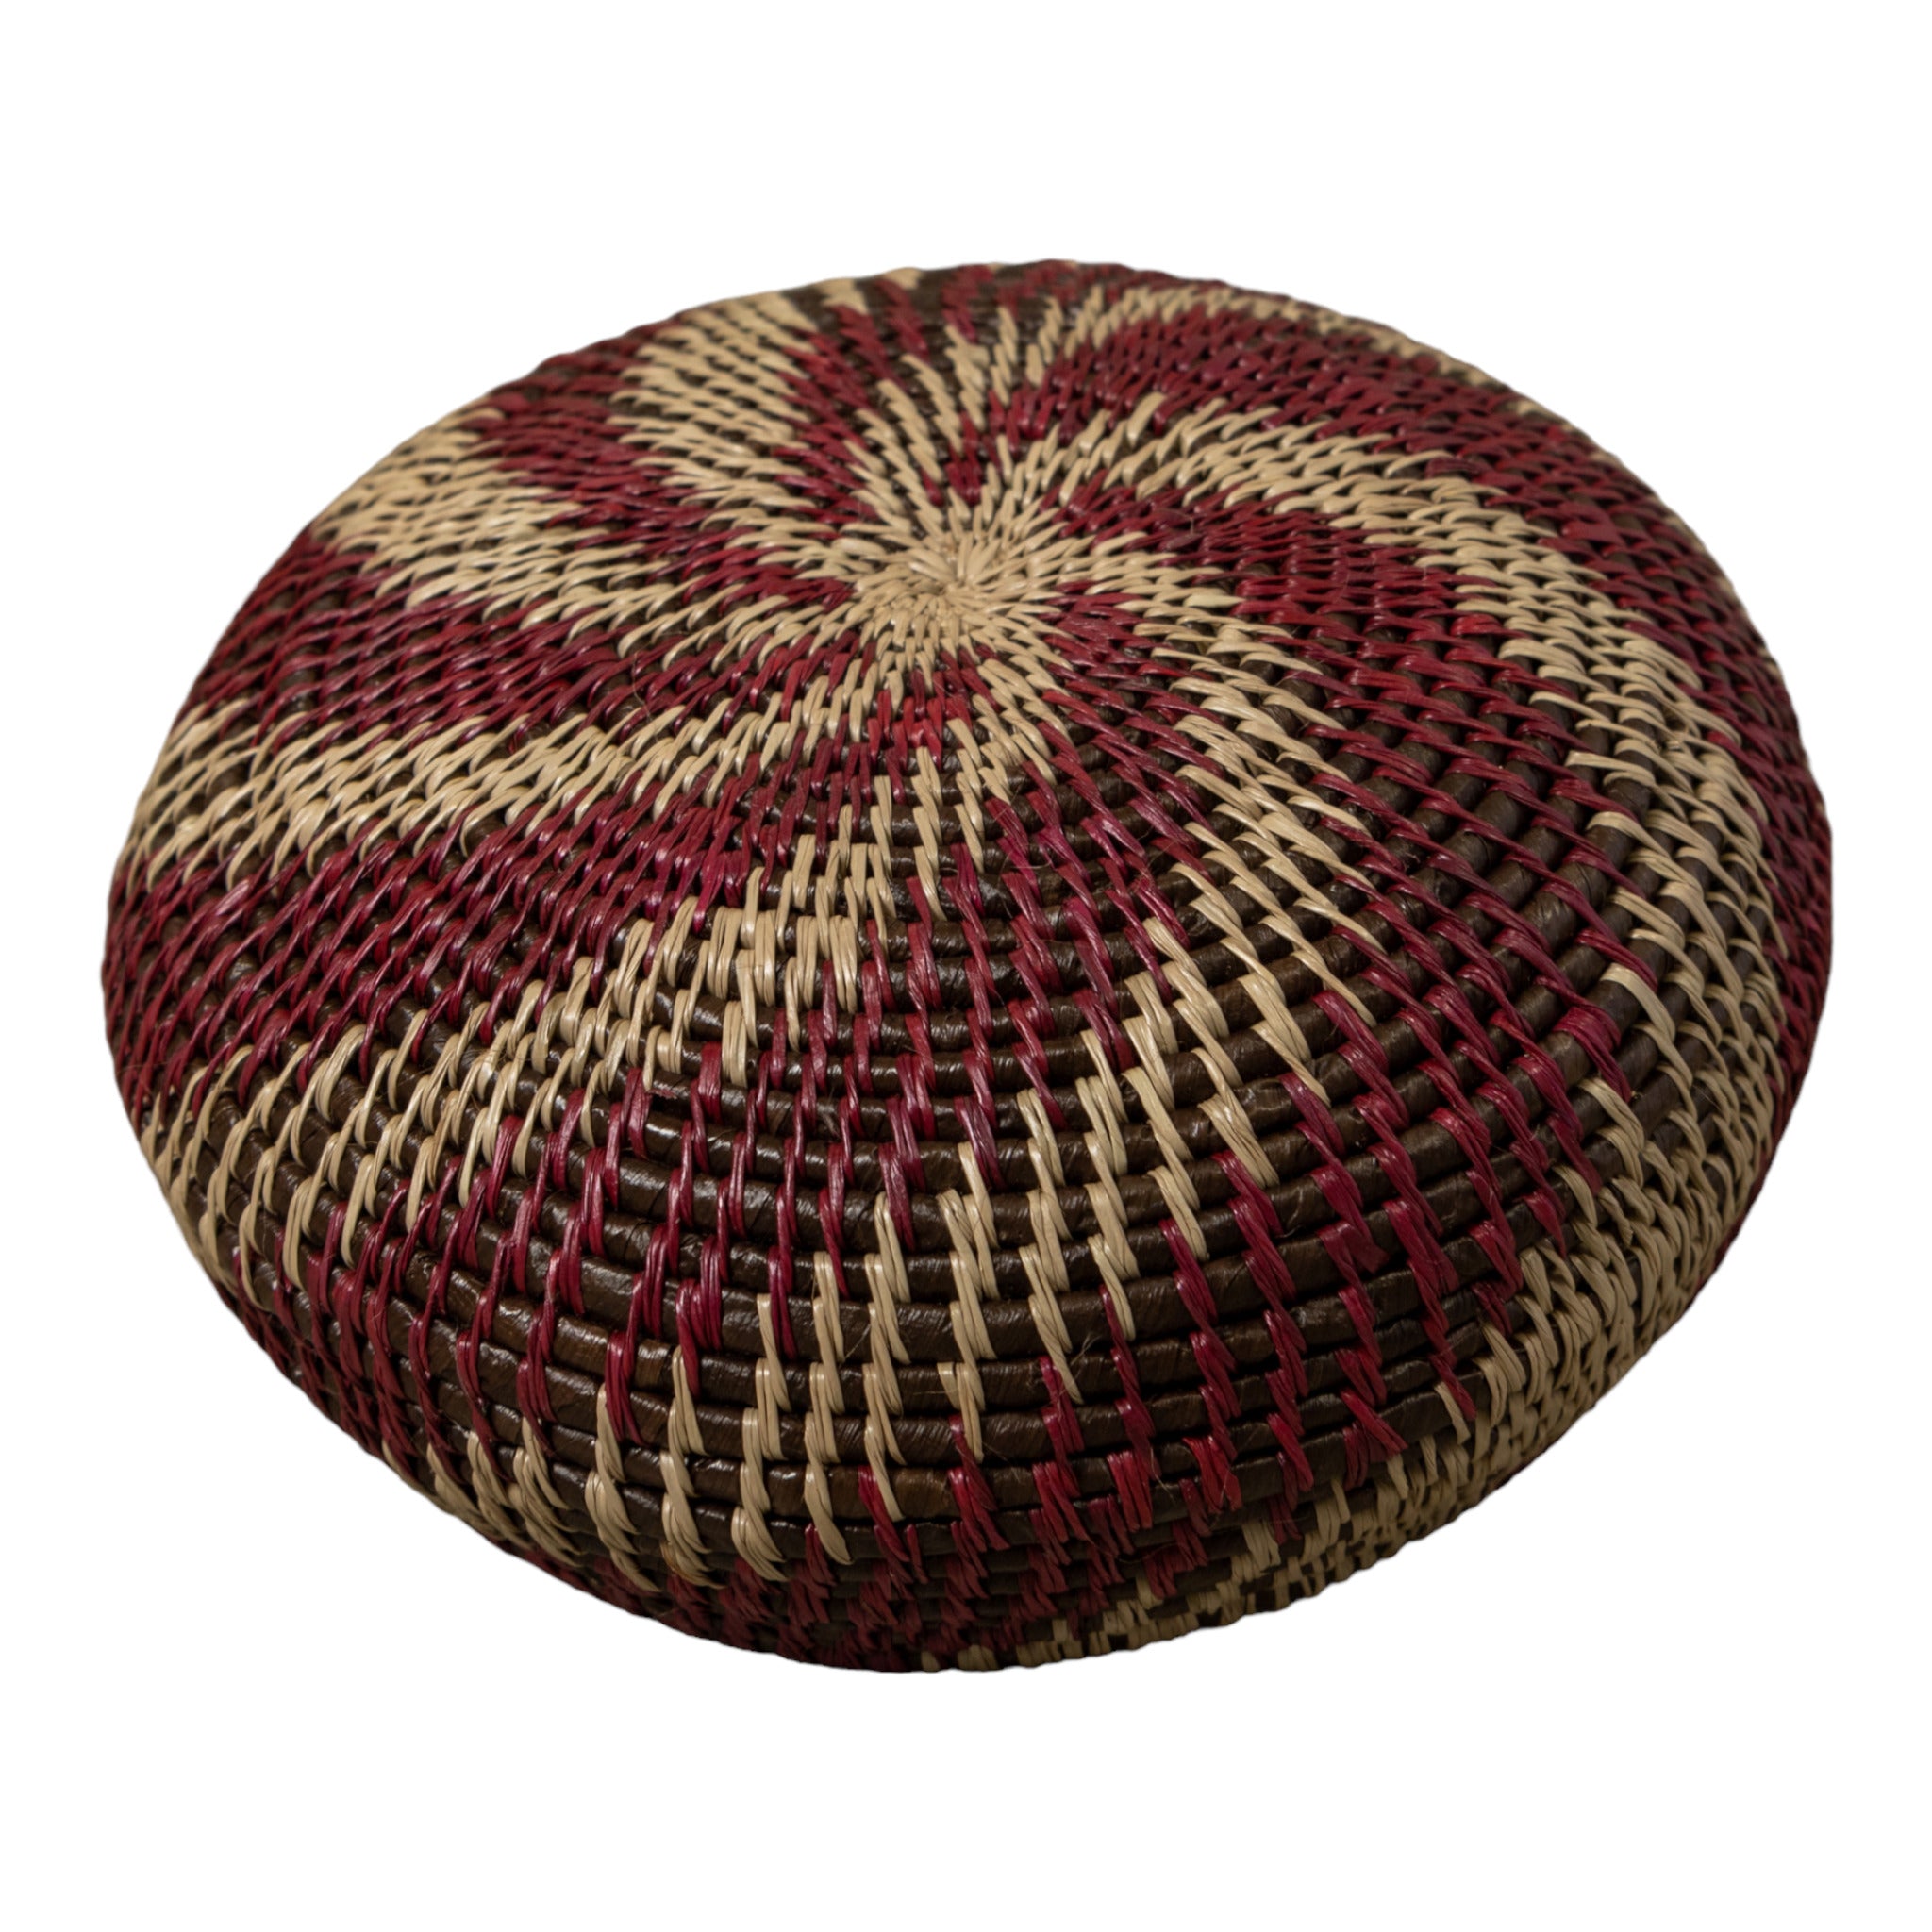 Maroon And Gray Swirl Rainforest Basket With Top